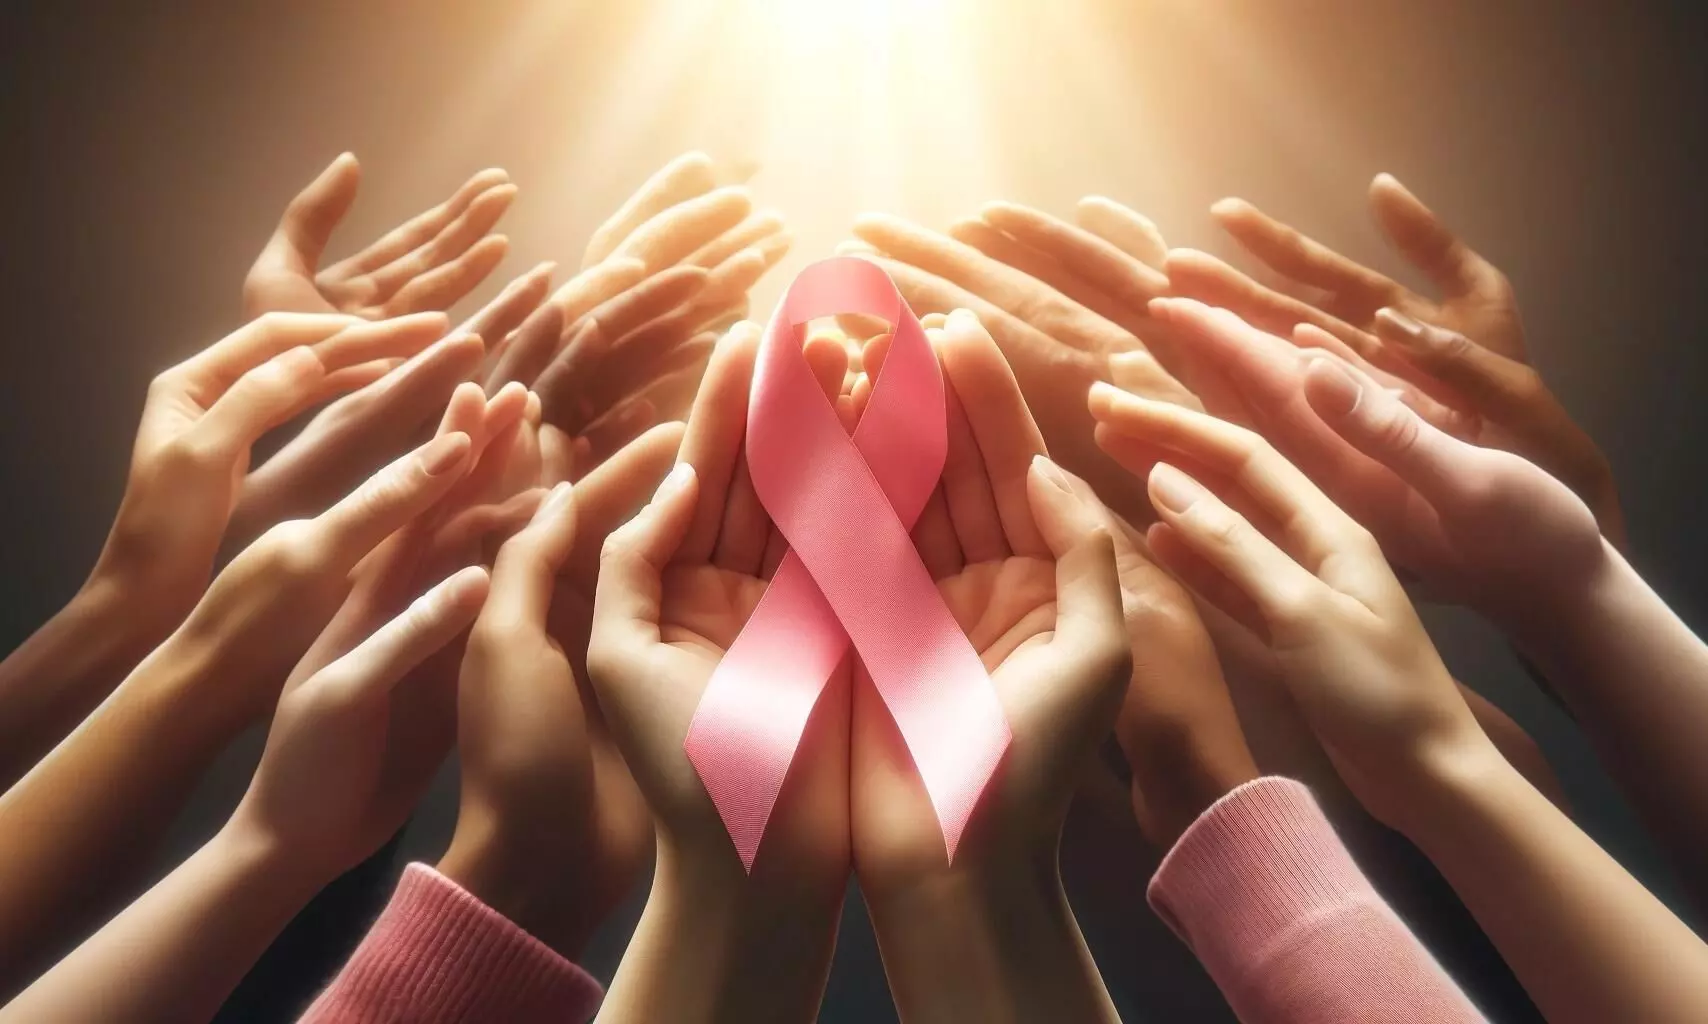 Breast cancer to cause a million deaths a year by 2040: Lancet commission